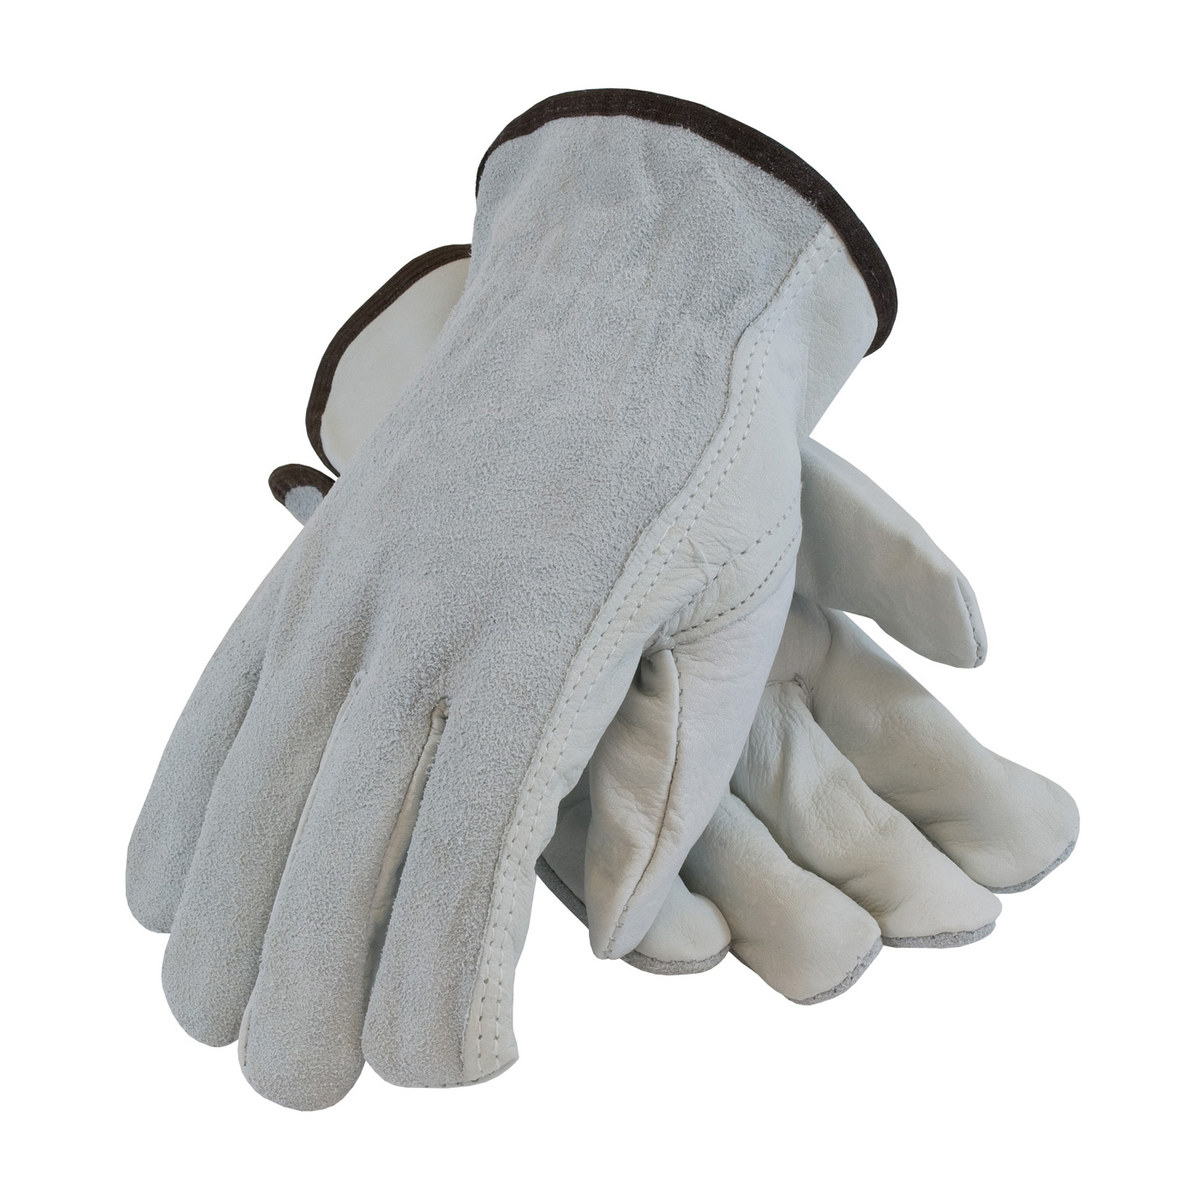 Cowhide Insulated Driver's Gloves W/ Keystone Thumb X-Large